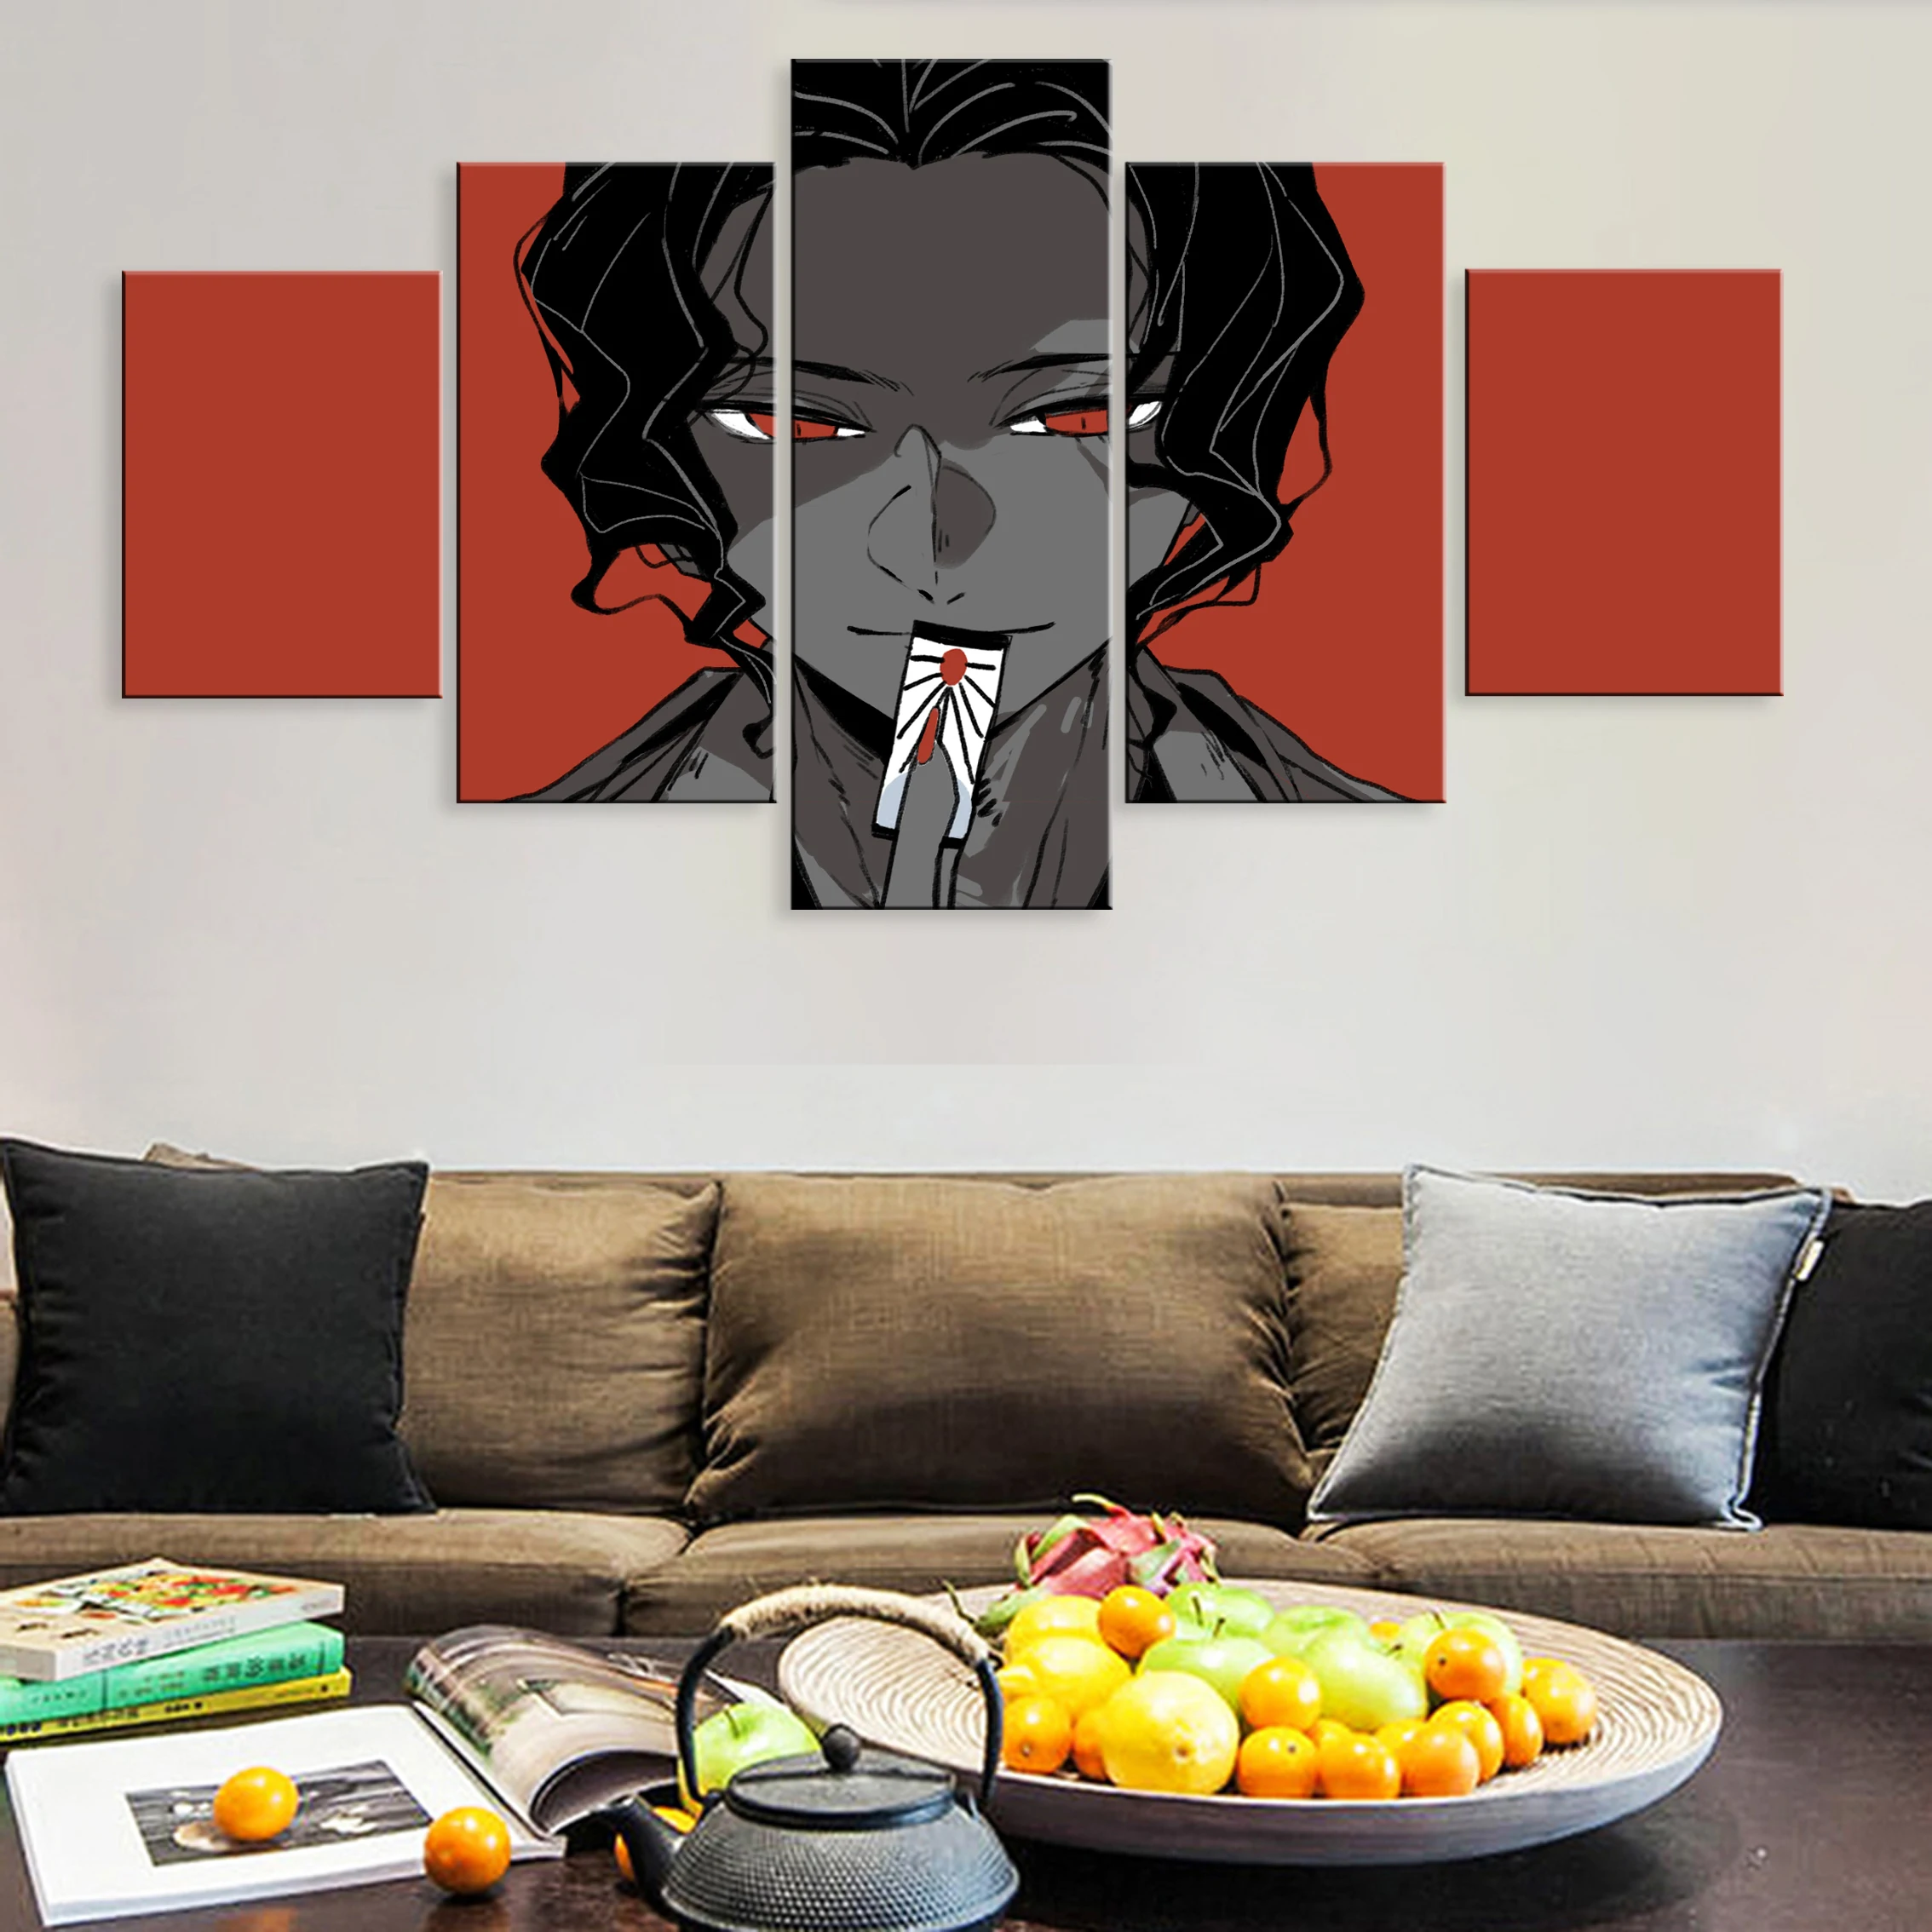 

Hd Printed Modern 5 Pieces Art Modular Poster Painting Canvas For Living Room Home Decor Framework Anime Demon Slayer Character